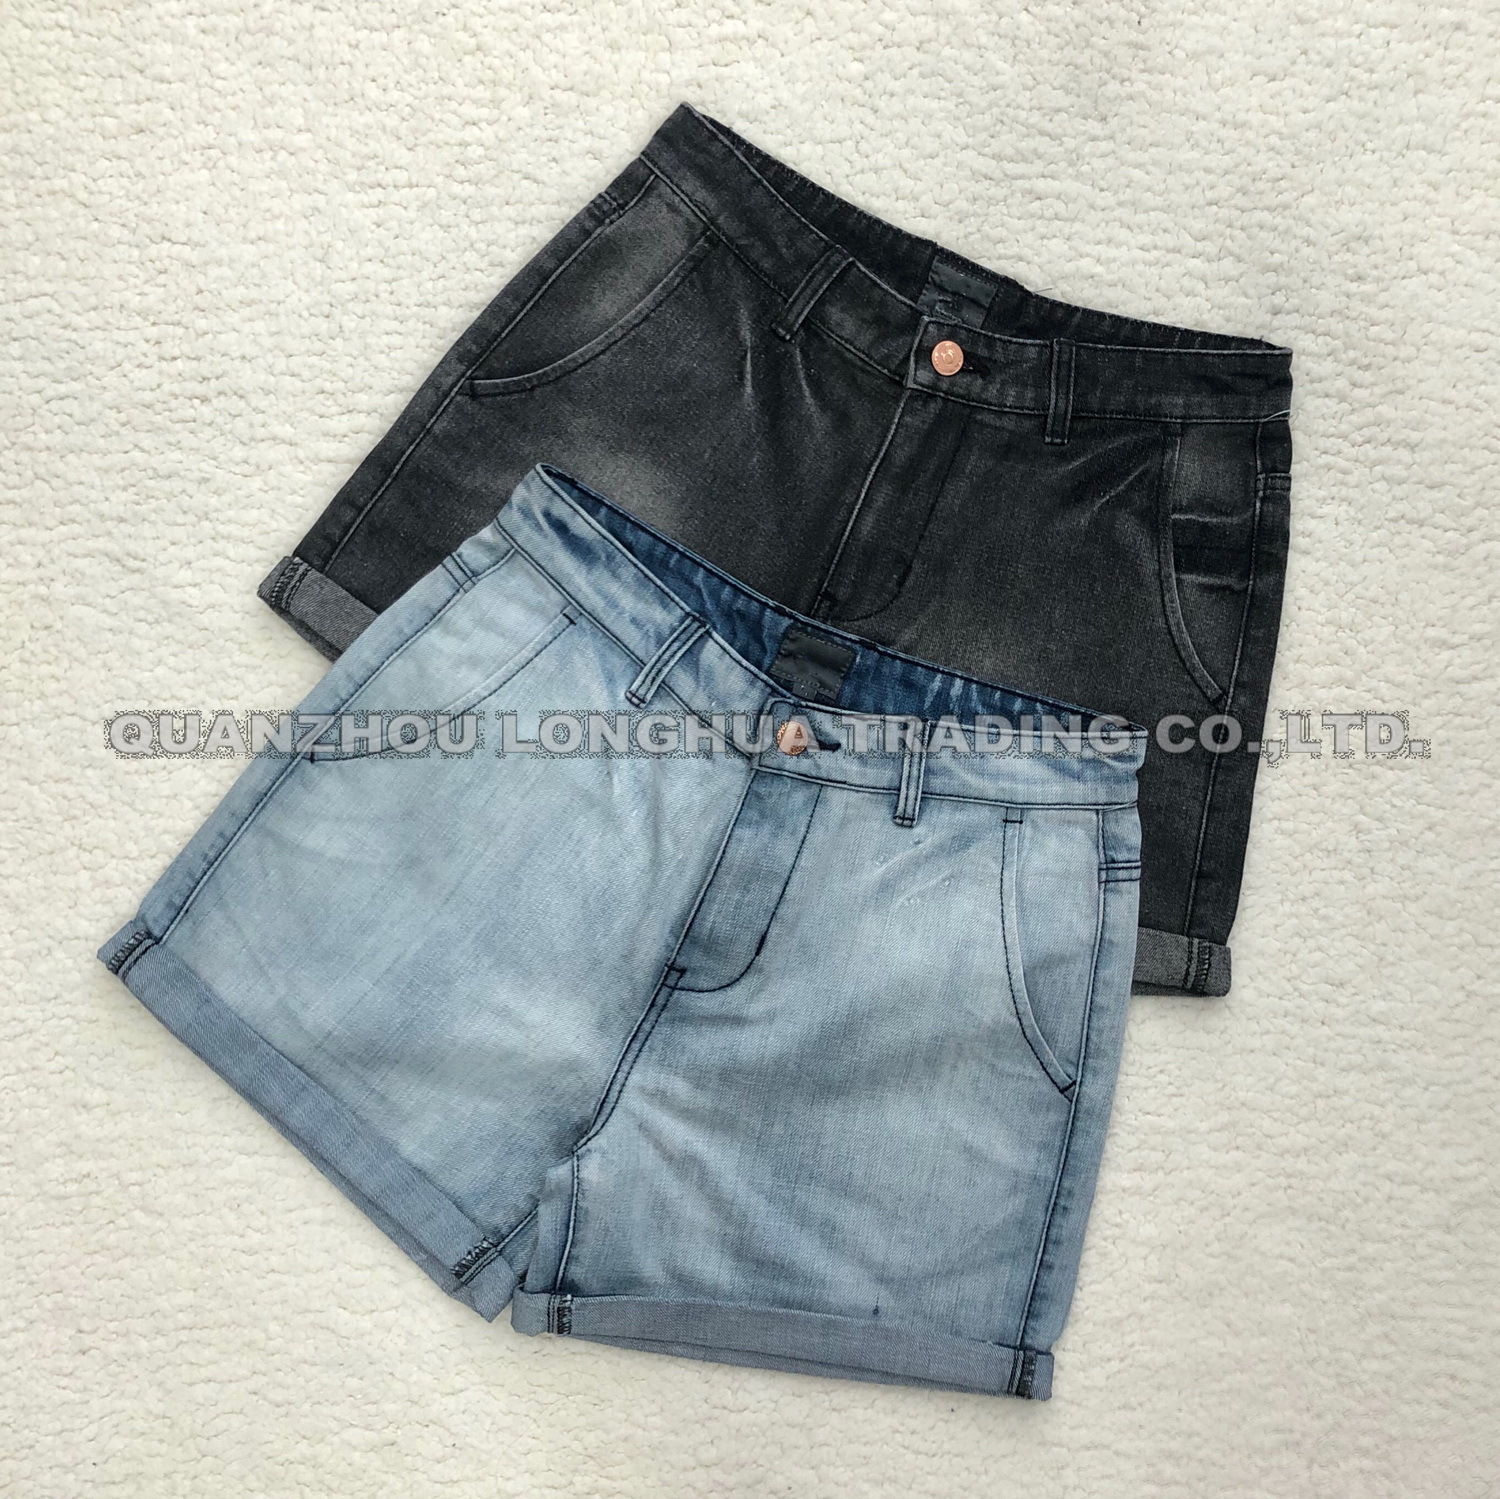 Ladys and Girls Denim Shorts Jeans Apparel Trousers New Fashion Cotton